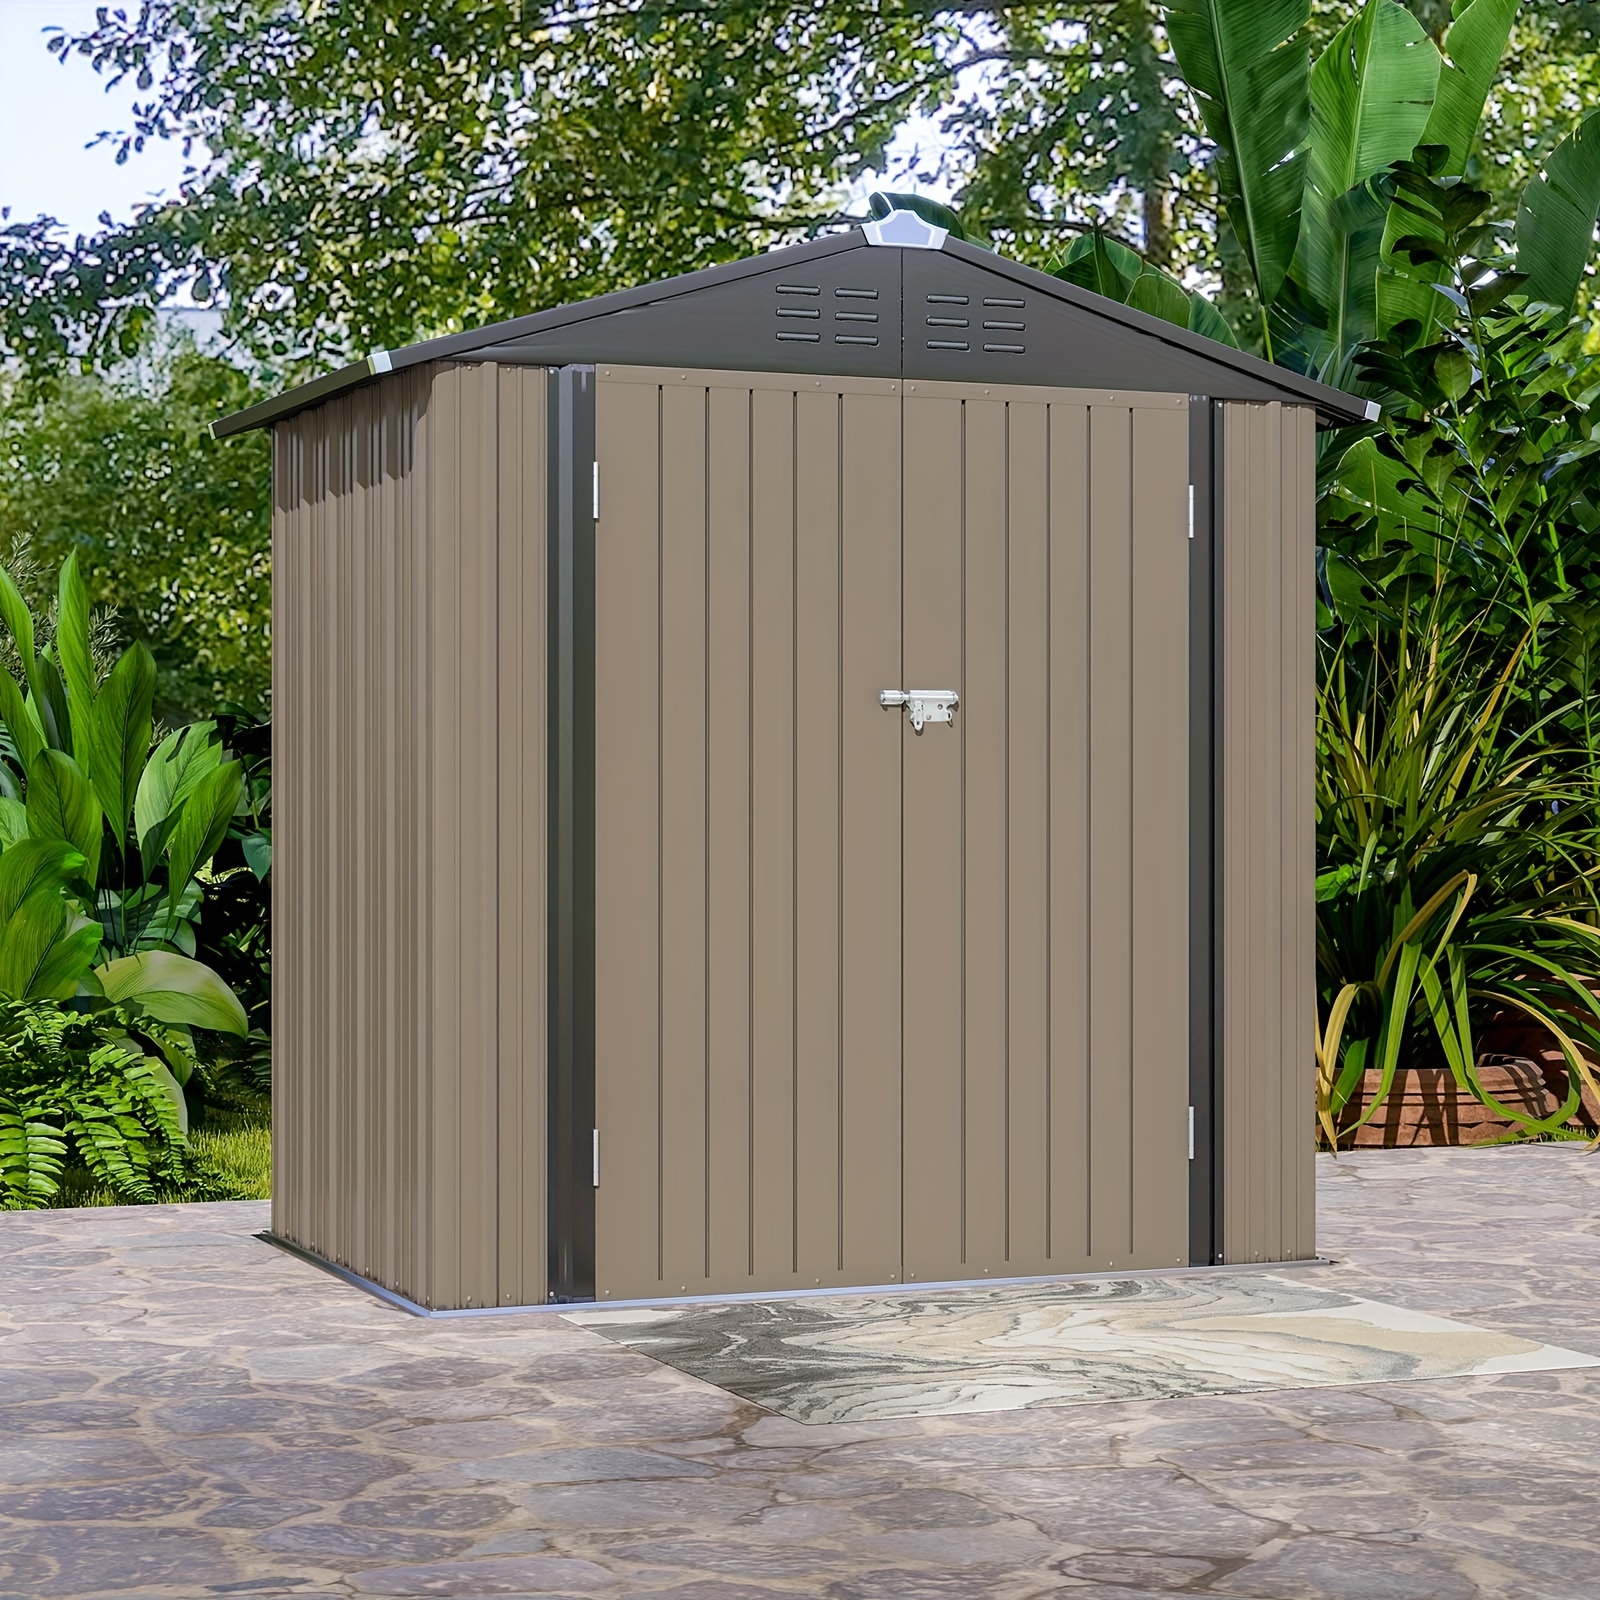 

6' X 4' Outdoor Storage Shed, Metal Garden Tool Storage Shed With Sloping Roof And Double Lockable Door, Outdoor Shed For Garden Backyard Patio Lawn Seating & Booths&chairs